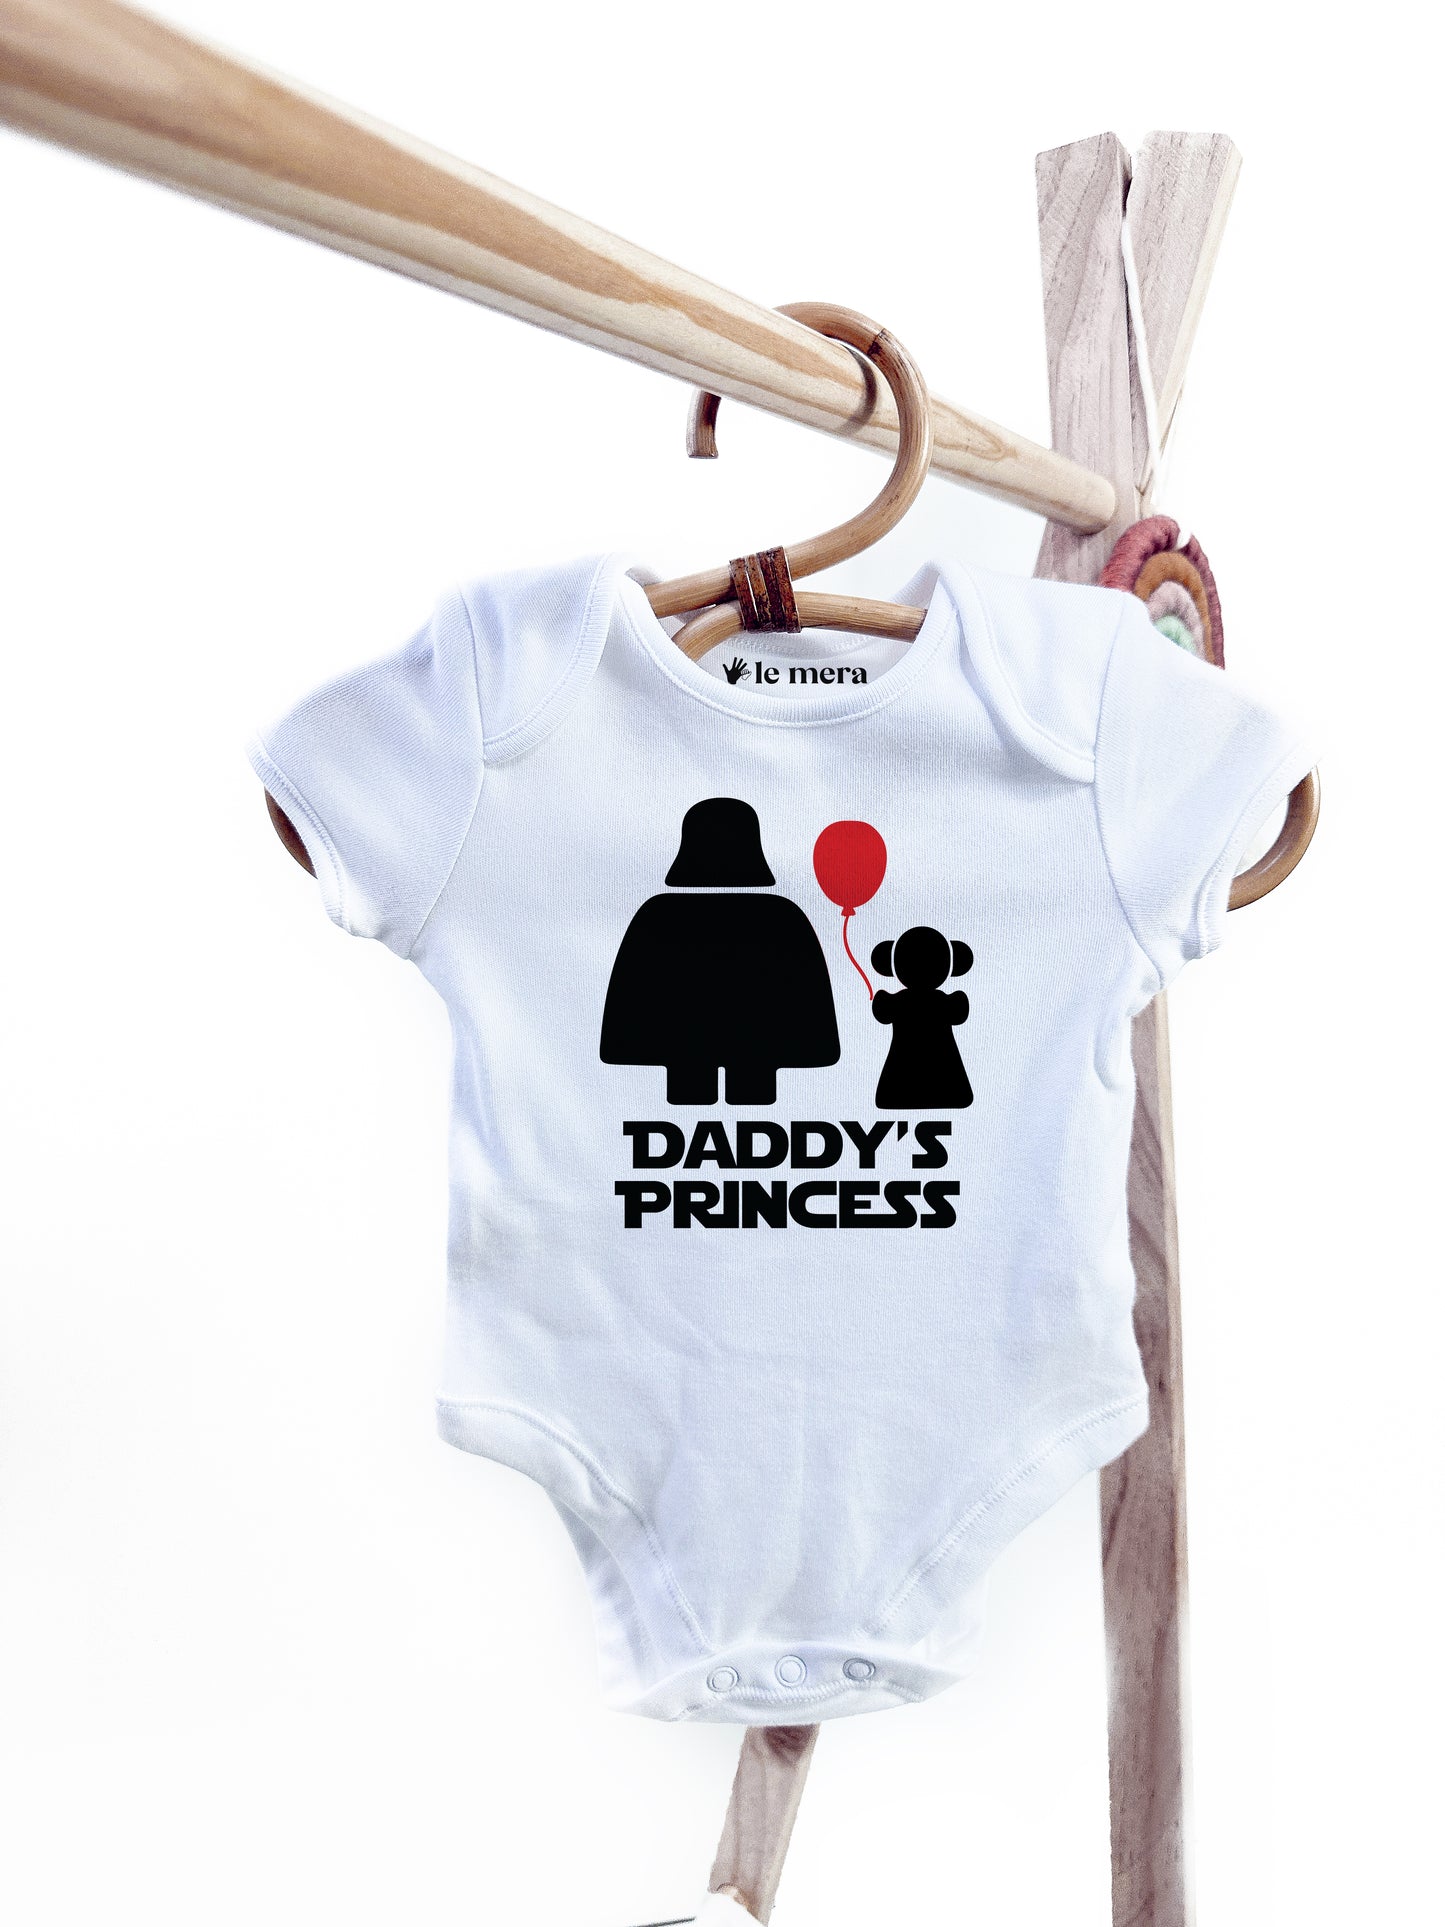 Daddy's Princess Baby Vest, Baby Grow